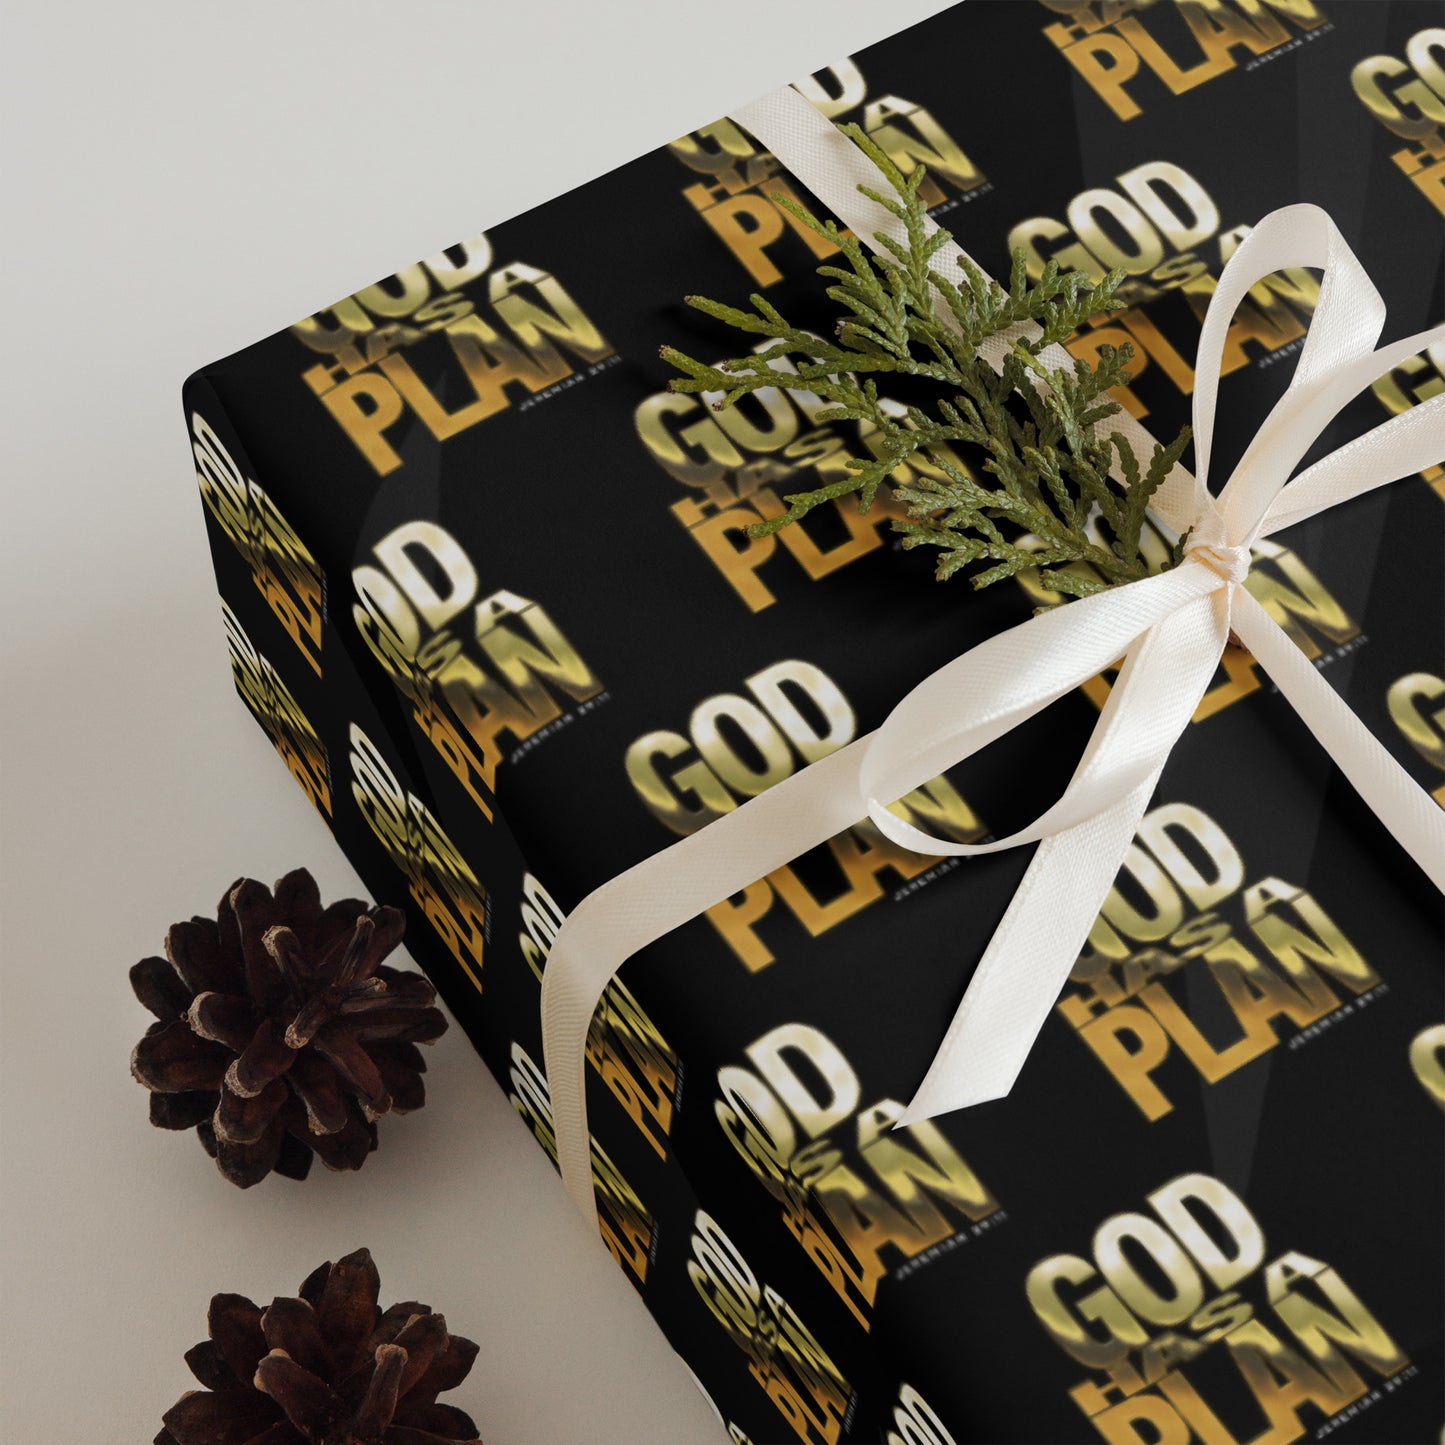 Wrapping paper sheets (God Has a plan, Daughter of a King)